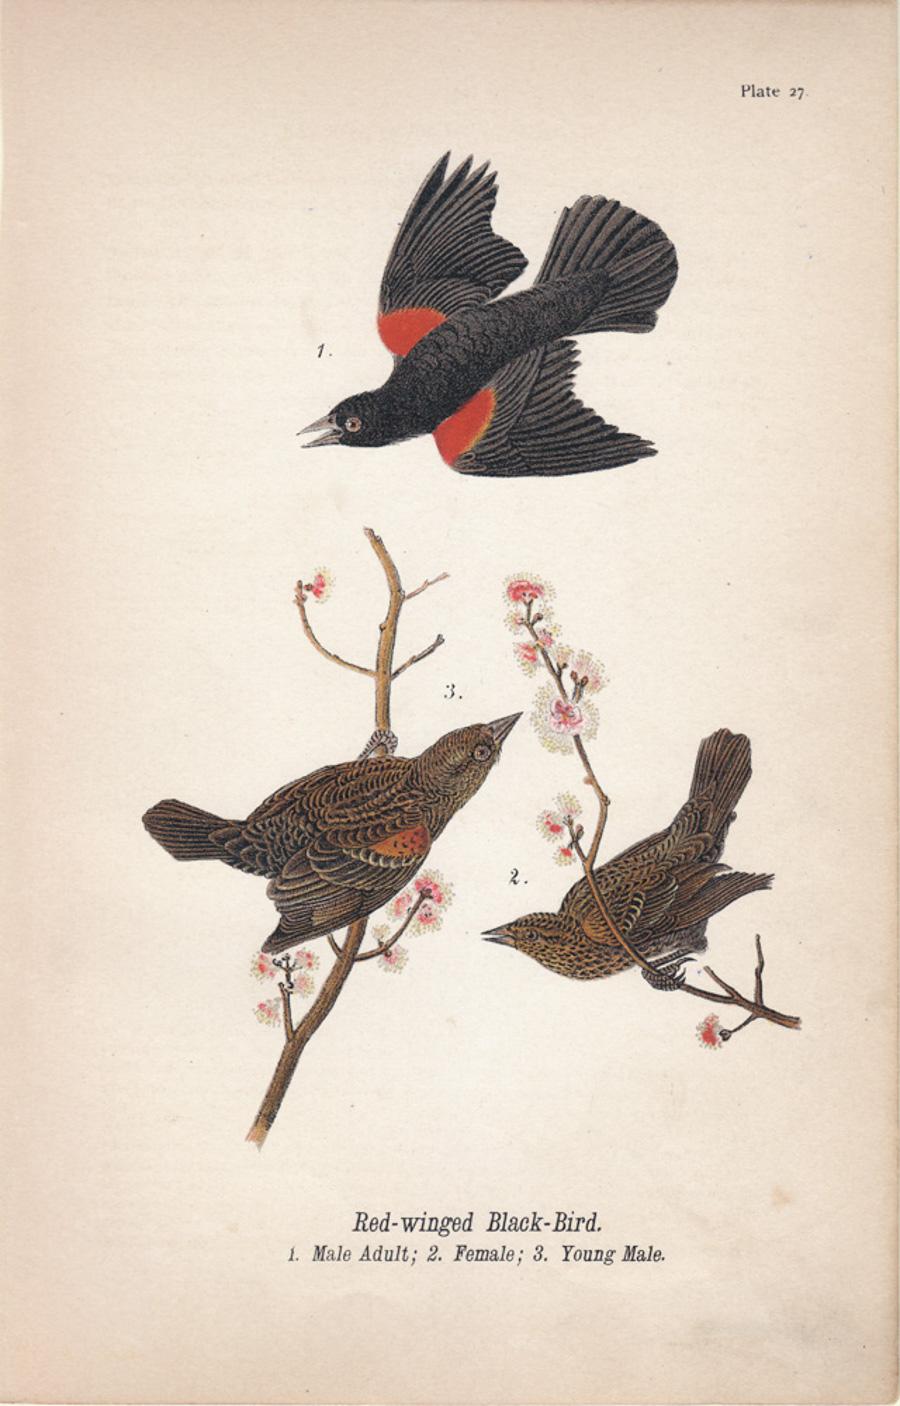 Red-winged Black-Bird; Plate 27